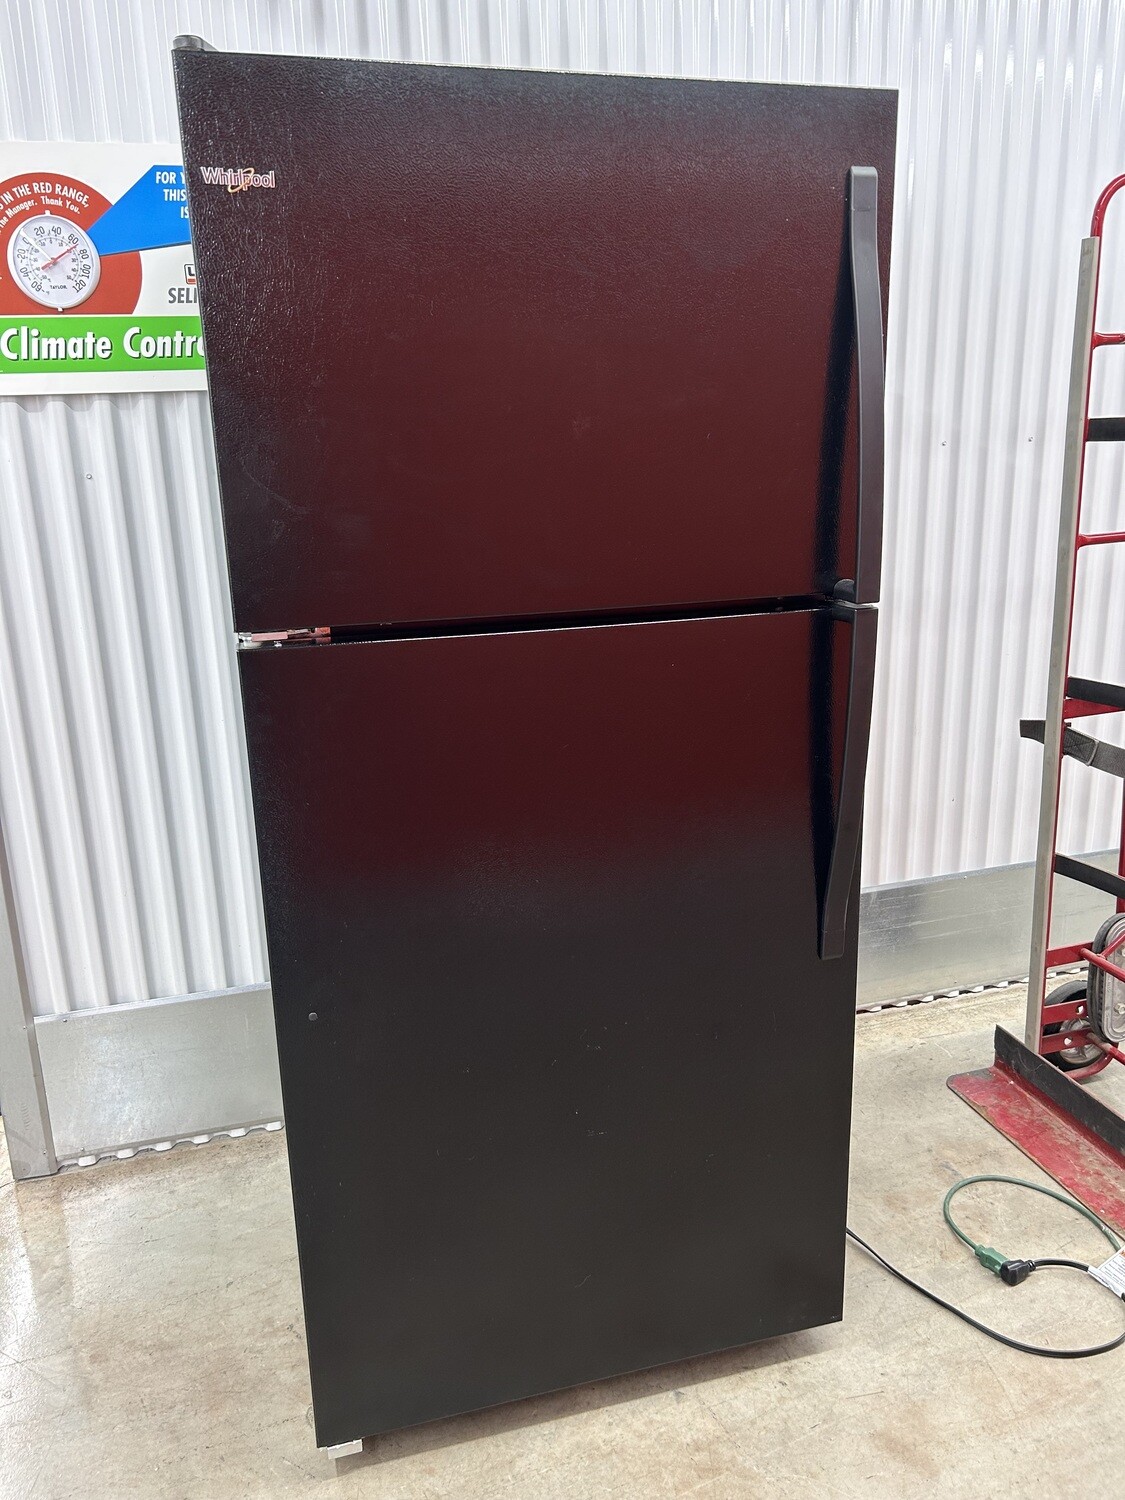 2021 Whirlpool Refrigerator, 18.2 cu. ft, less than 2 yrs old! #2124